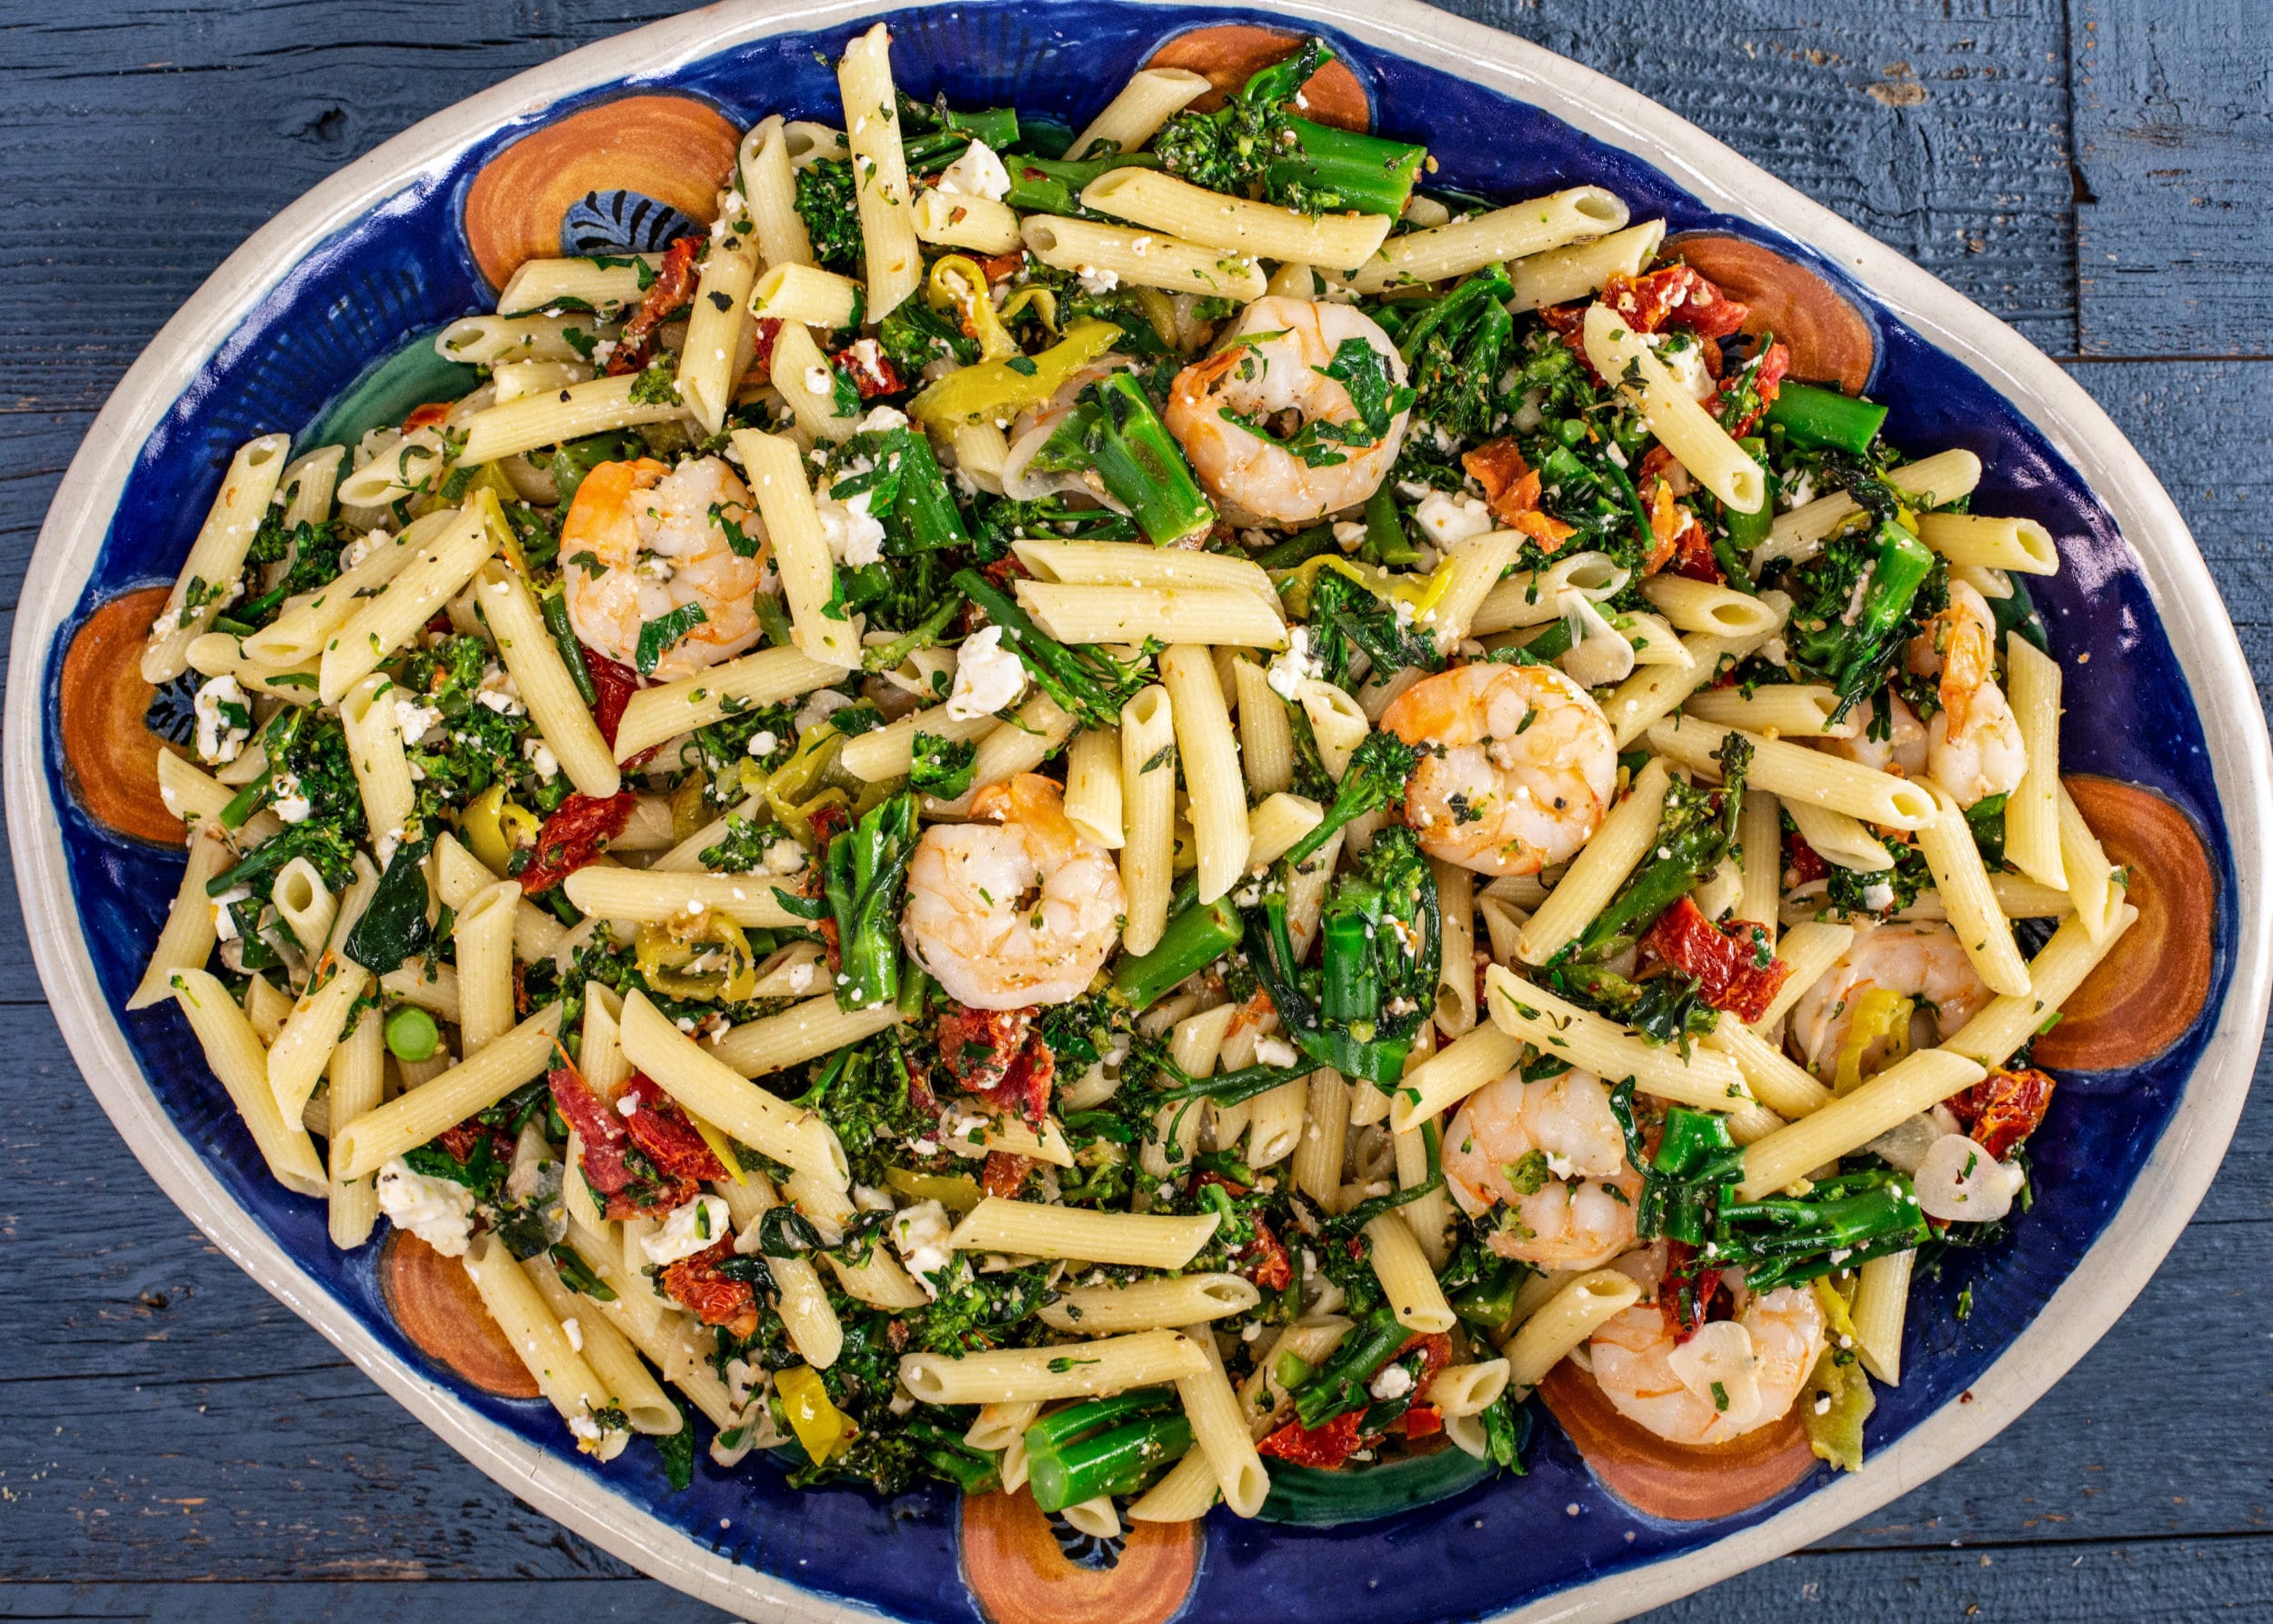 Rachael's Sundried Tomato and Broccolini Pasta with Shrimp